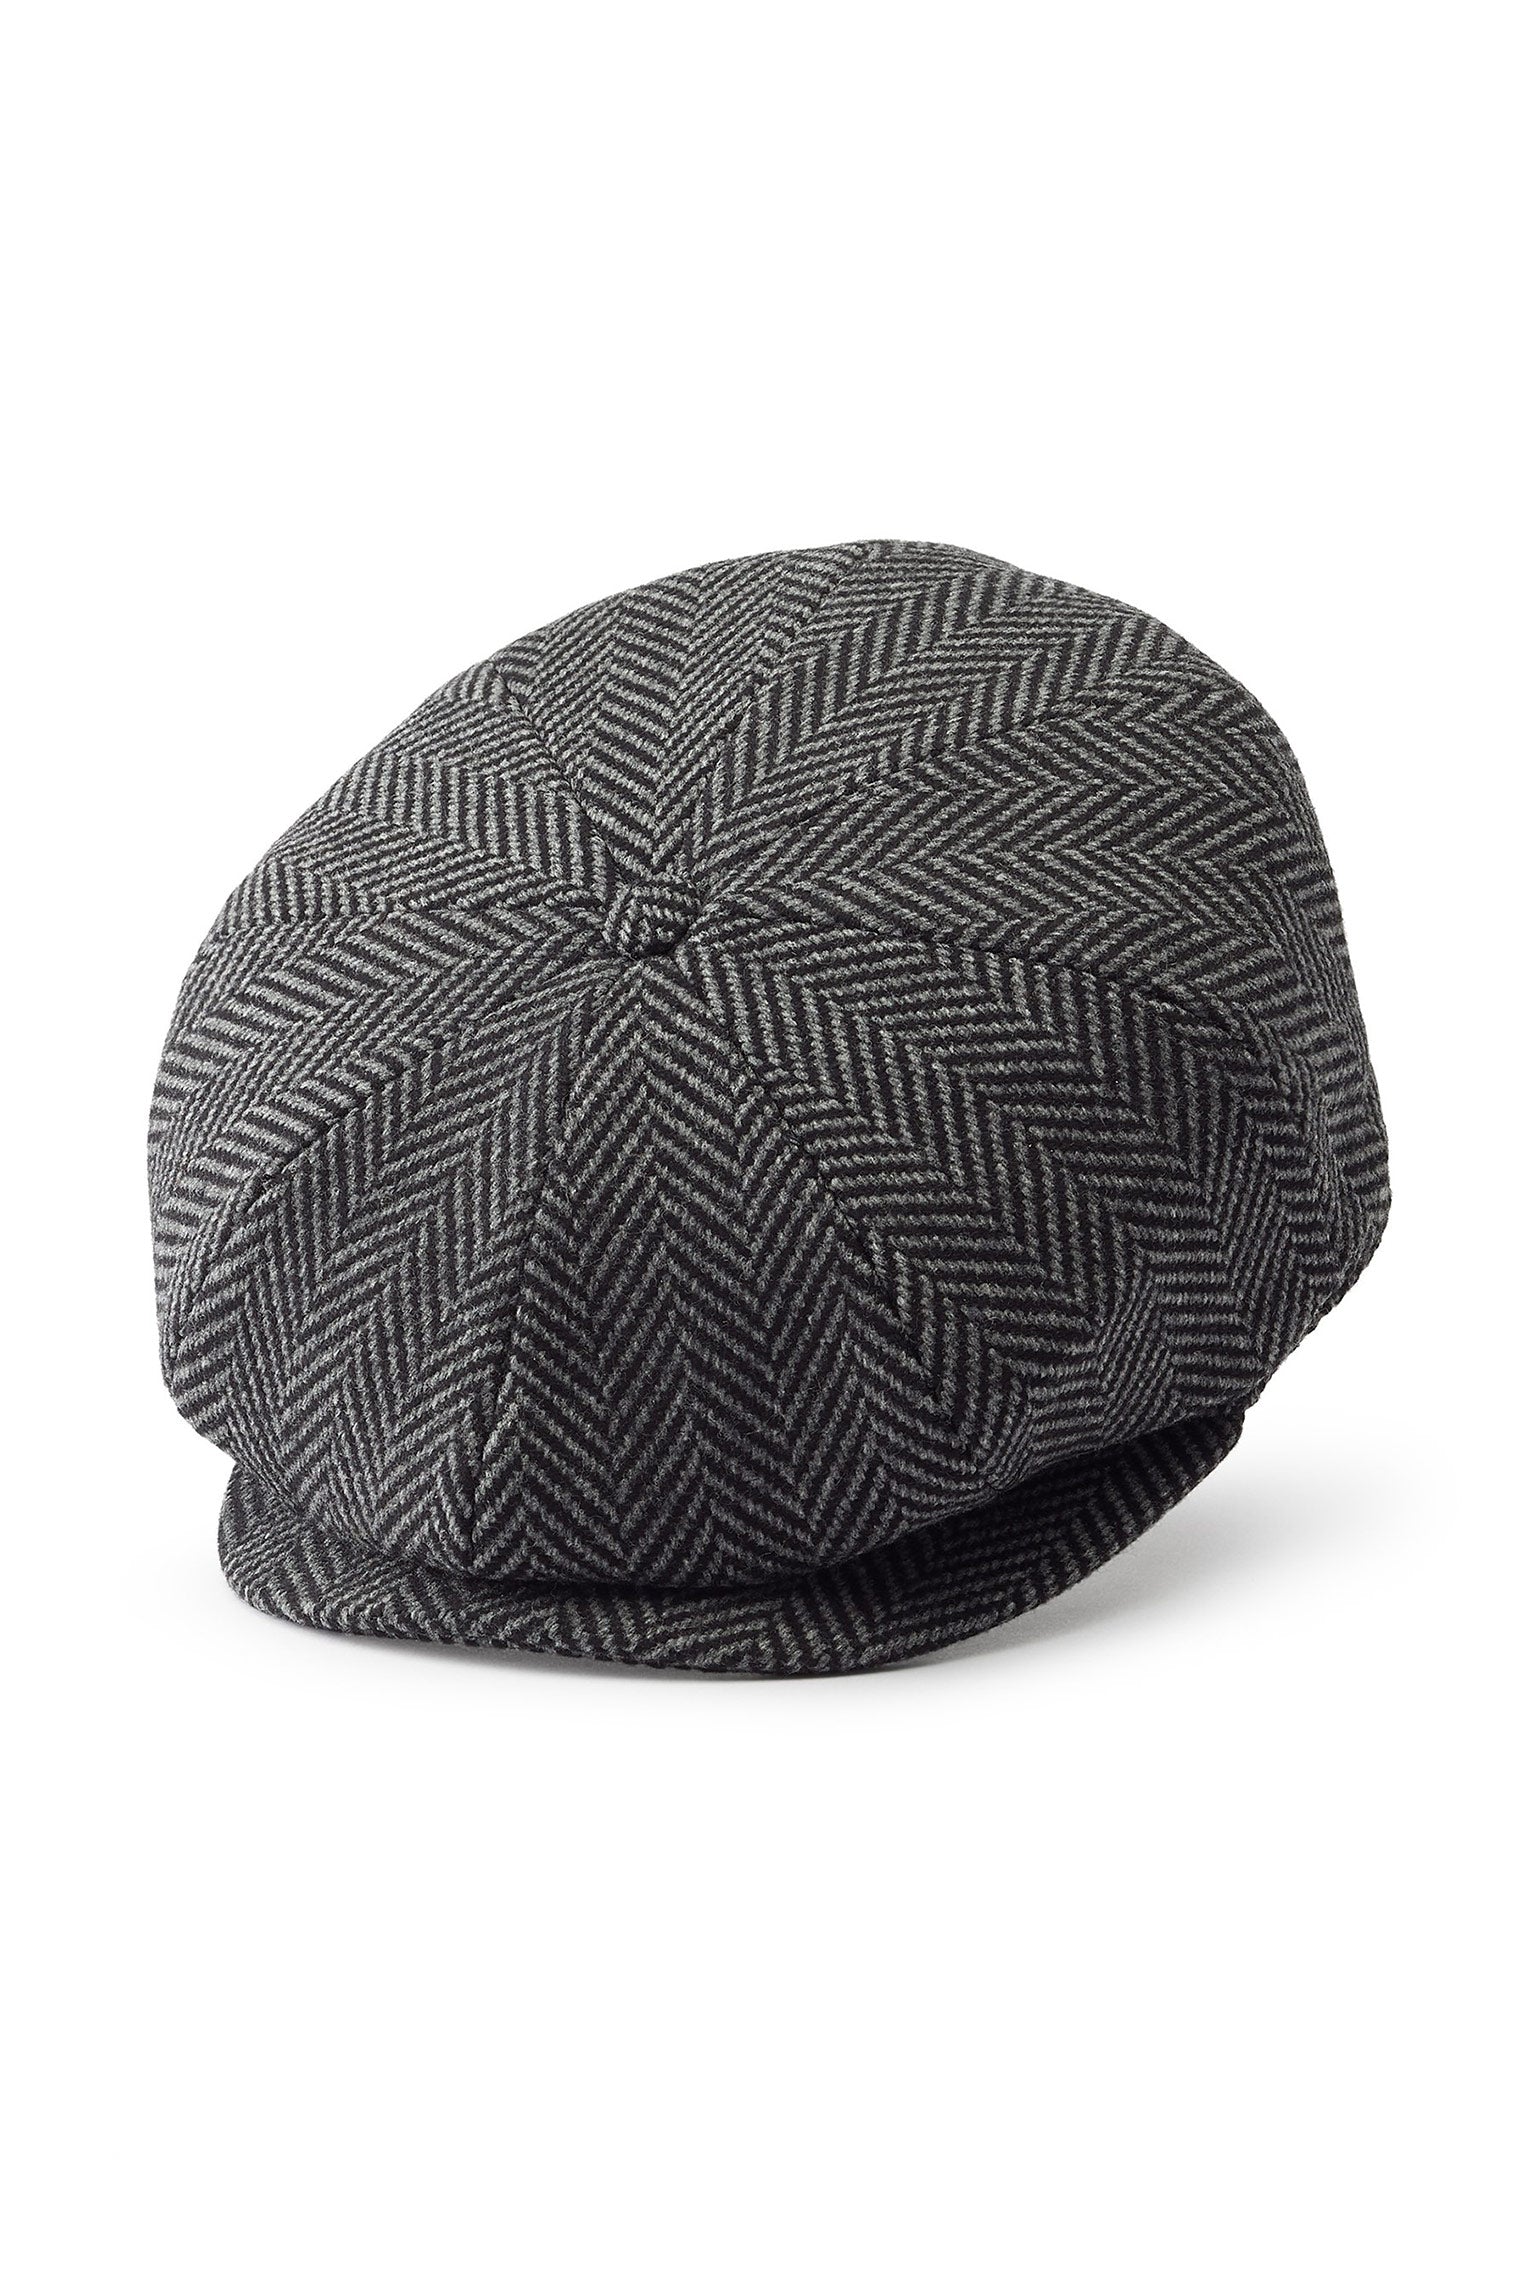 Escorial Wool Tremelo Bakerboy Cap - Hats for Oval Face Shapes - Lock & Co. Hatters London UK